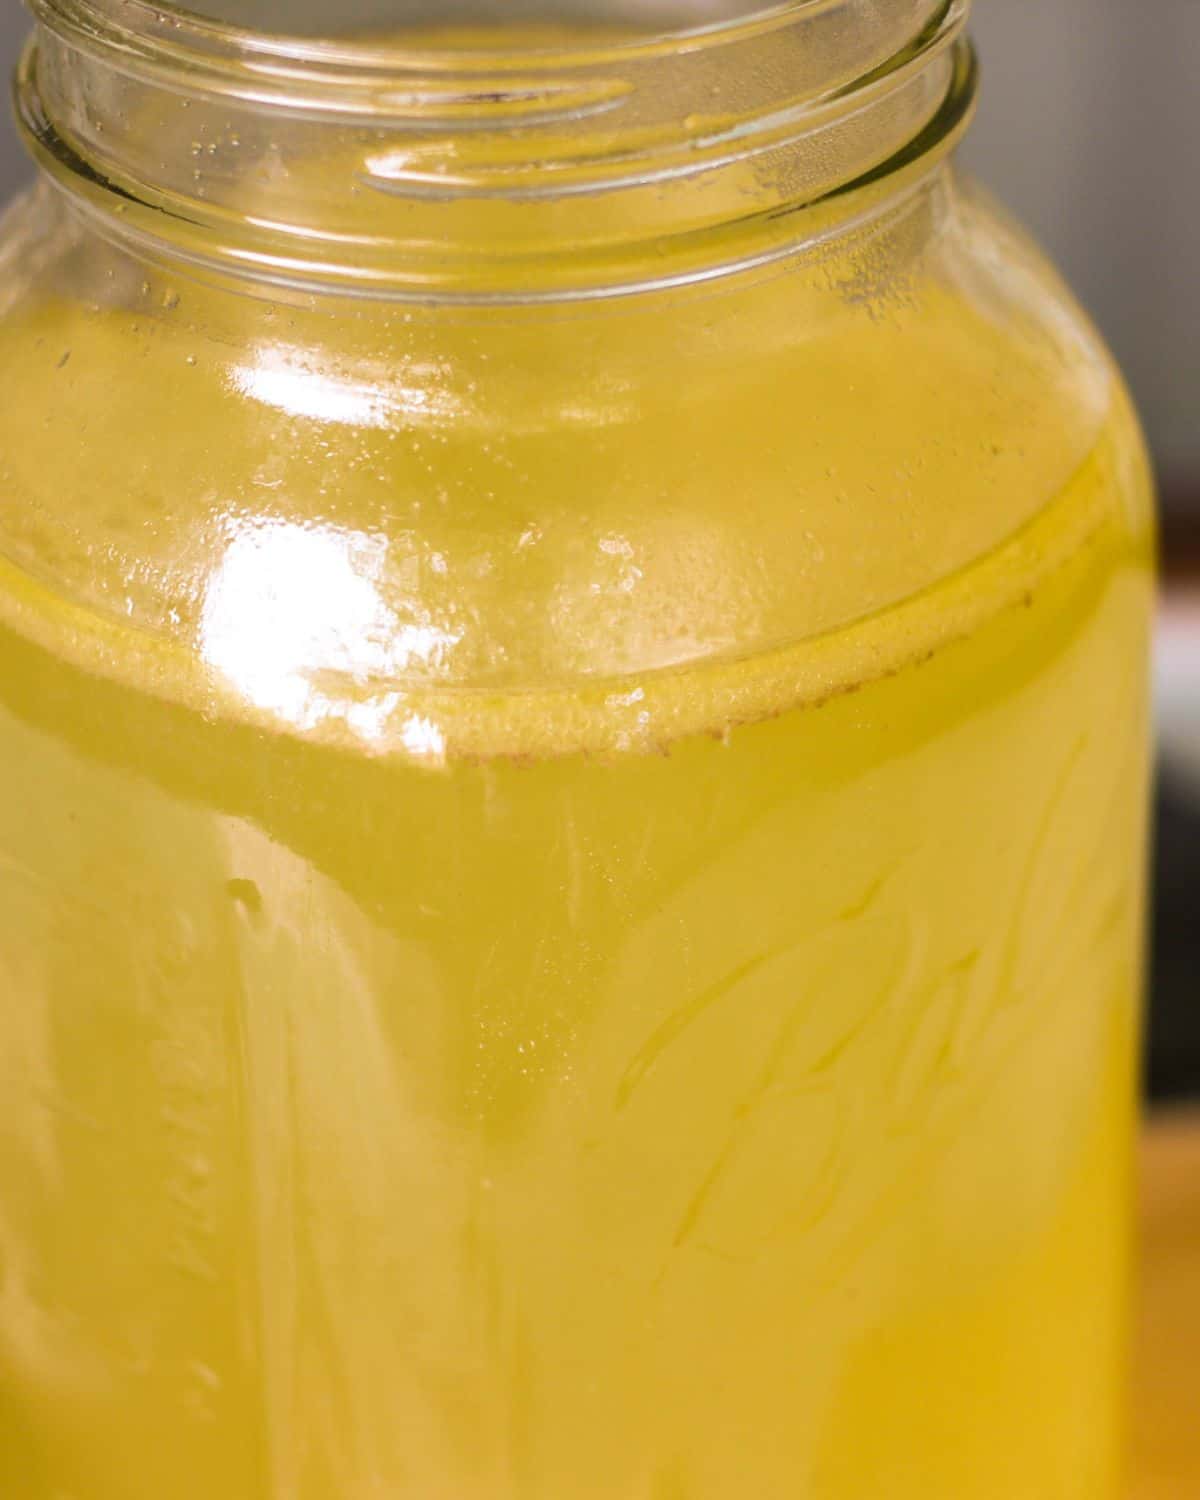 A glass clear large jar filled with yellow stock.